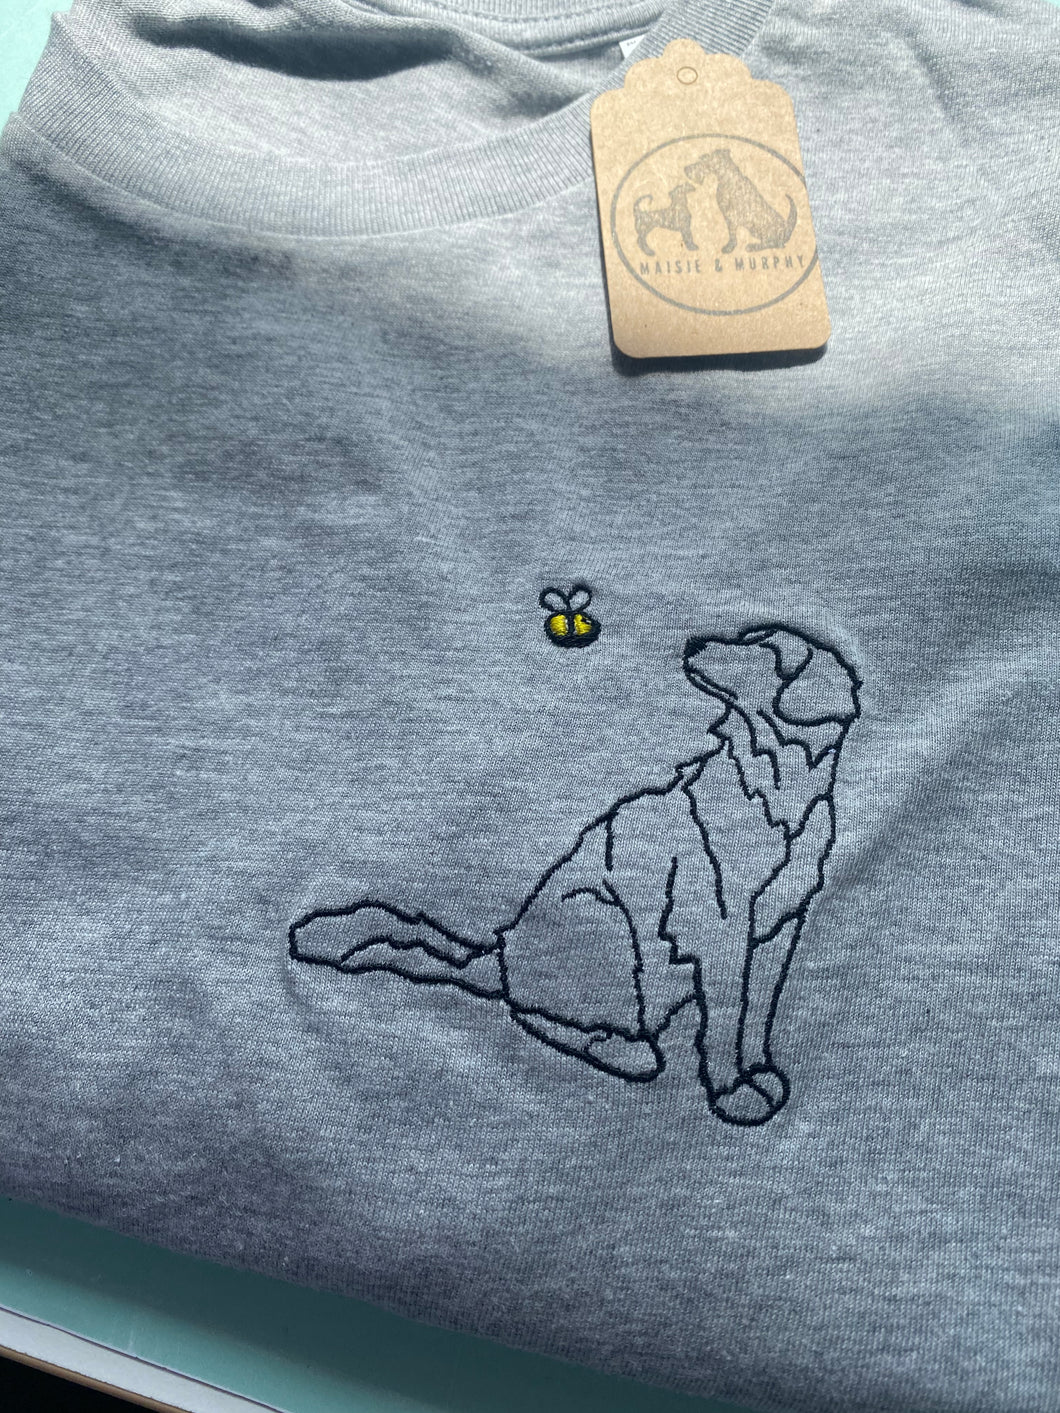 Nova Scotia Duck Retrieving Toller Outline Sweatshirt - Gifts for toller owners and lovers.